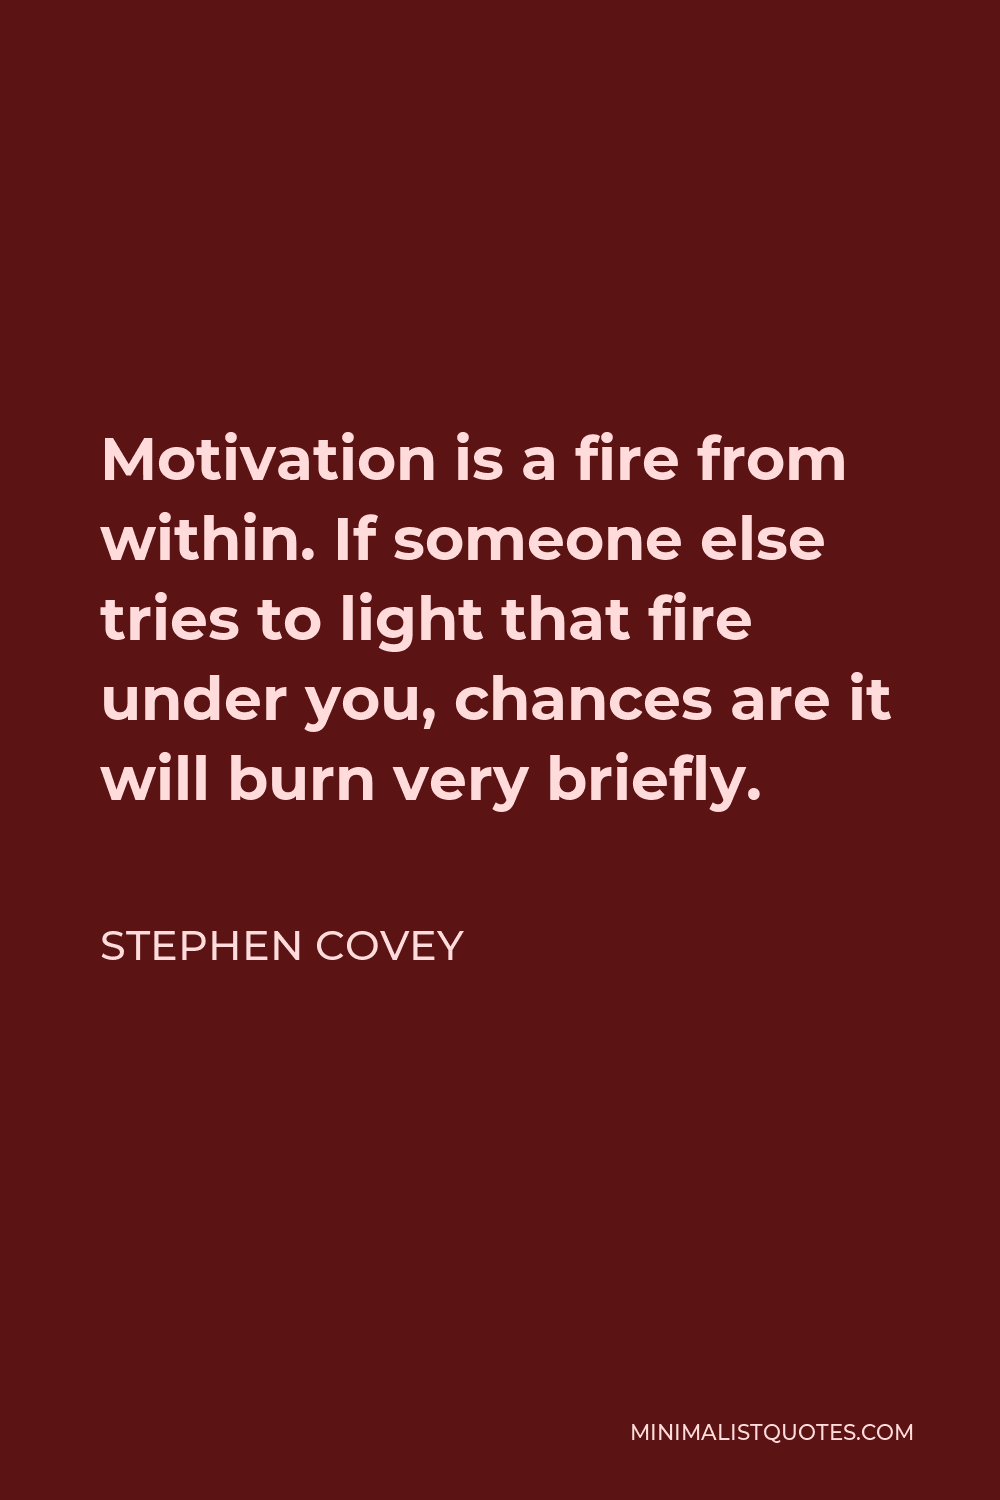 Stephen Covey Quote - Motivation is a fire from within. If someone else tries to light that fire under you, chances are it will burn very briefly.